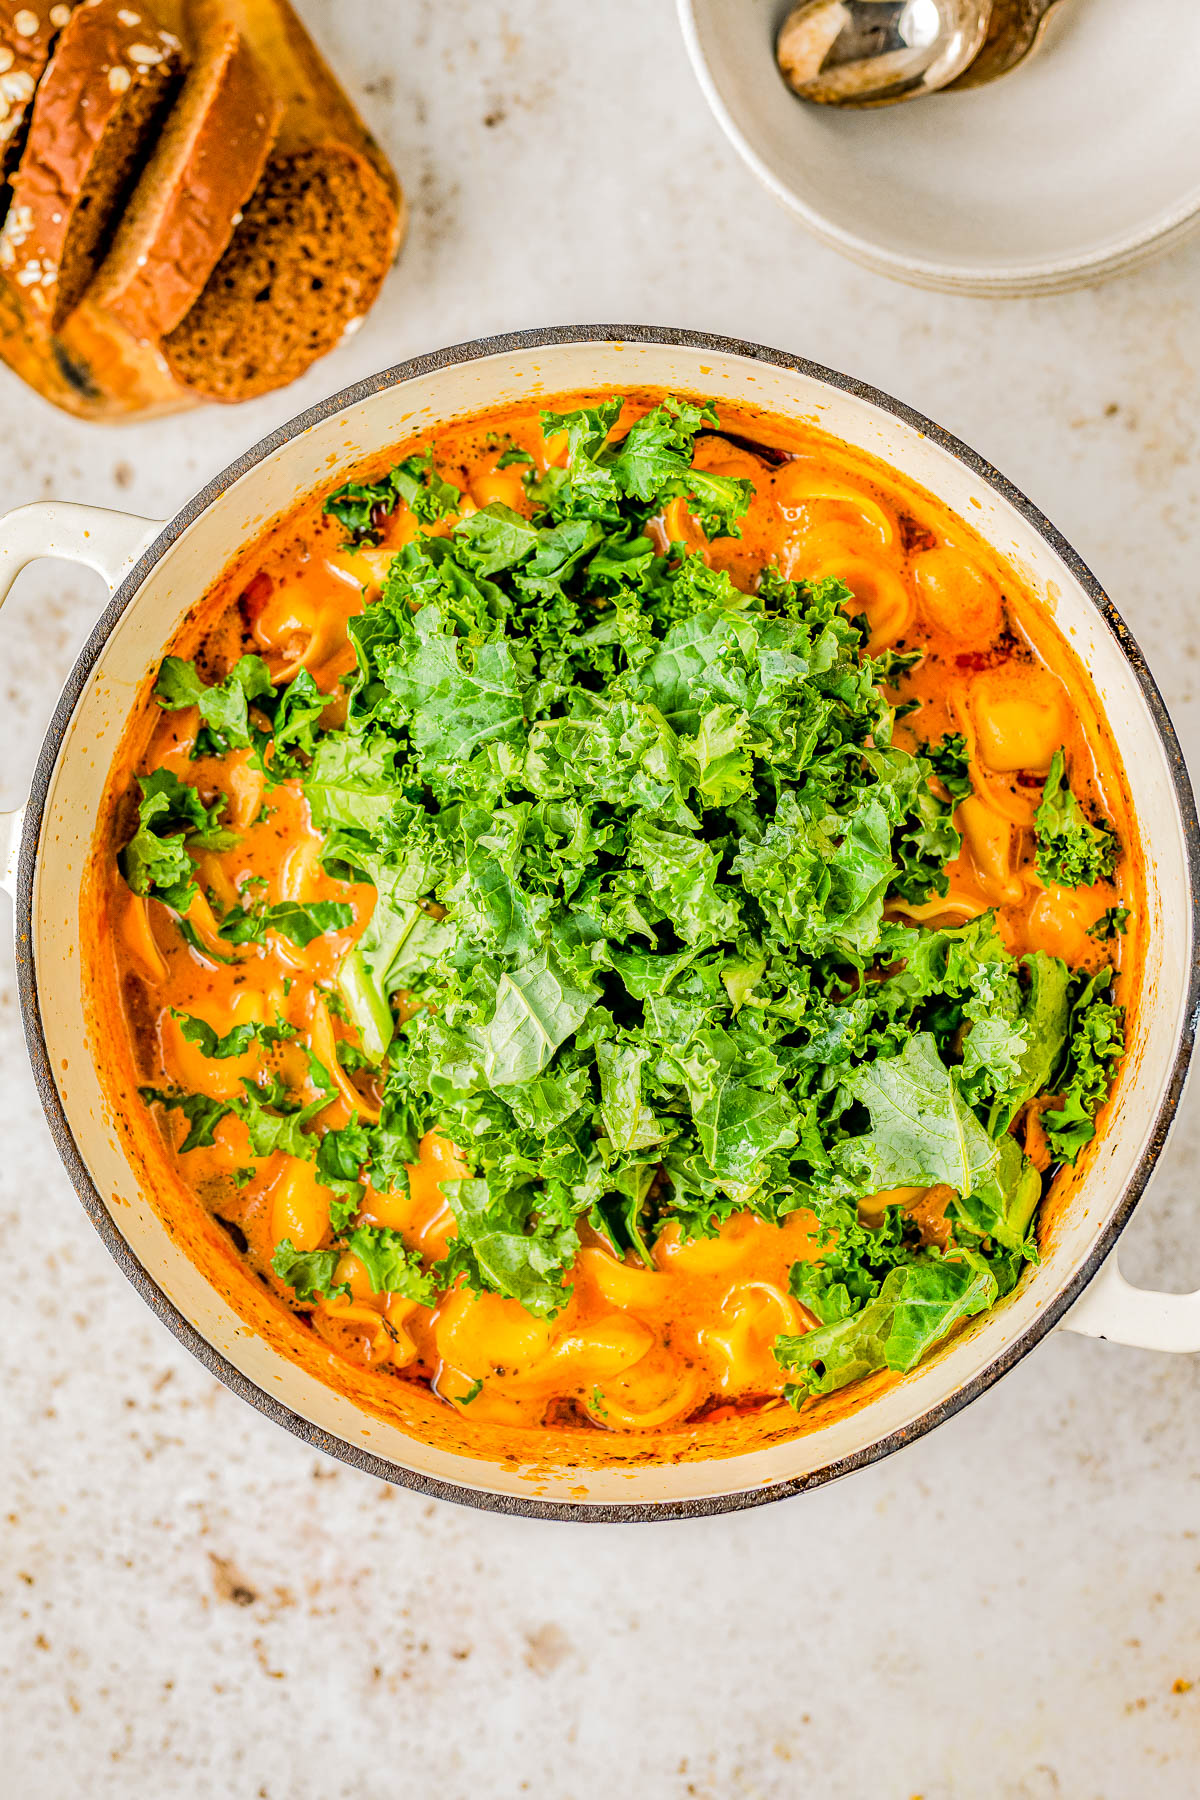 Sausage Tortellini Soup - Indulge in the warmth and coziness of this EASY Italian sausage tortellini soup that's made in one pot and ready in 30 MINUTES! Made with cheesy tortellini, juicy sausage, carrots and kale for extra nutrients, and a rich and creamy tomato sauce broth! This comfort food soup recipe is perfect for chilly weather and you can make it on busy weeknights because it's so QUICK!